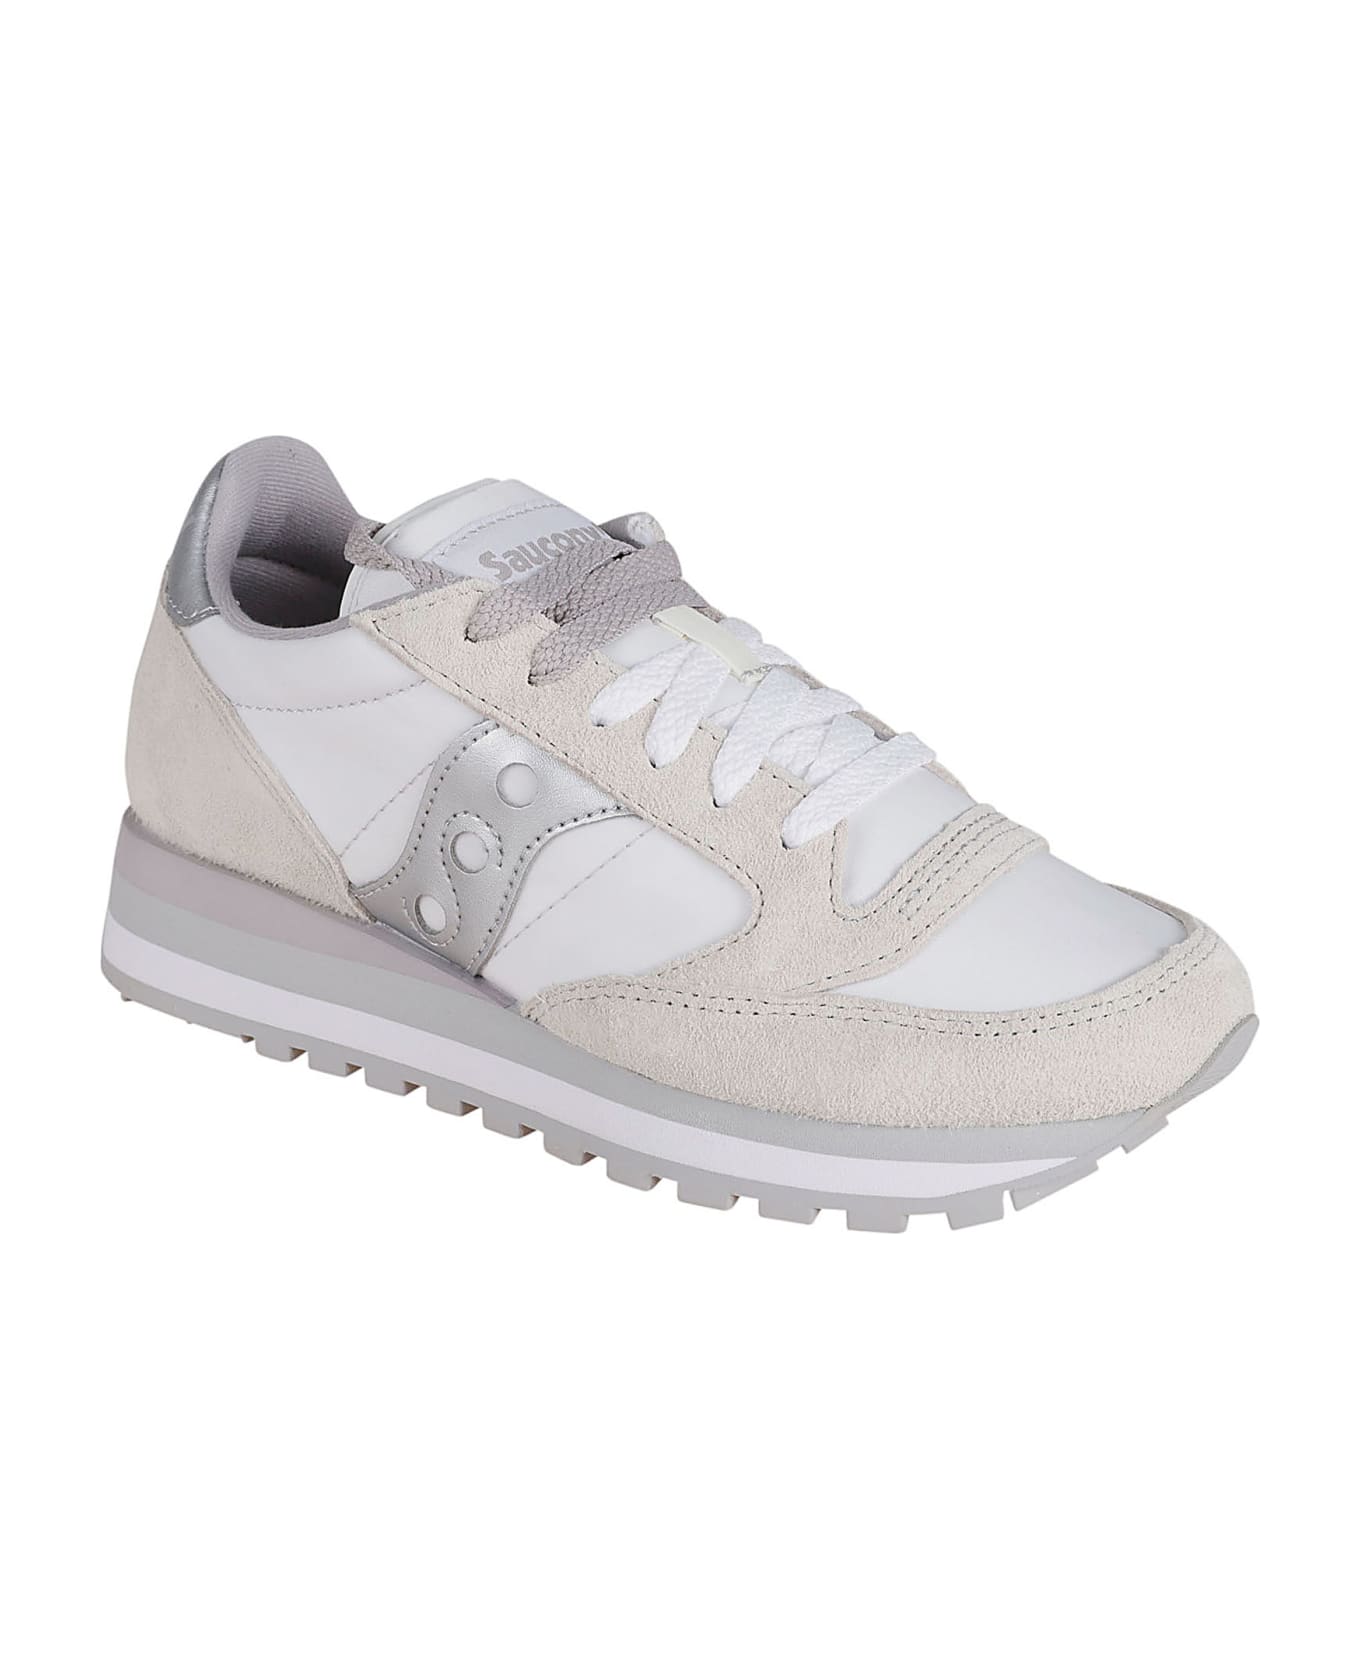 Saucony Triple Sneakers - White/Silver スニーカー